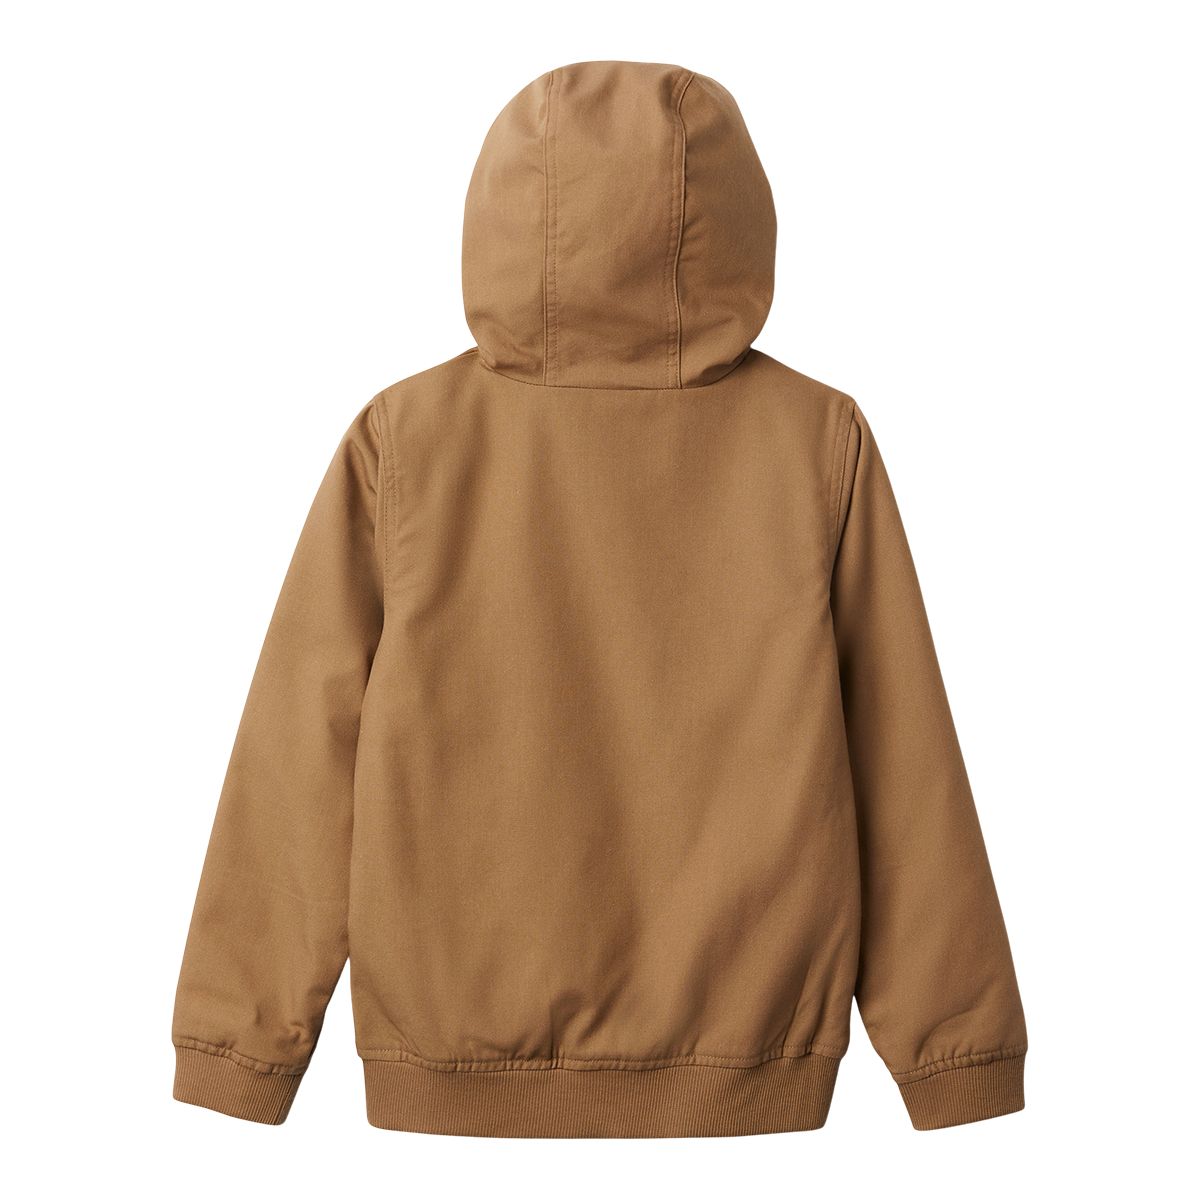 https://media-www.sportchek.ca/product/div-03-softgoods/dpt-76-outerwear/sdpt-03-boys/333500368/columbia-loma-vista-hooded-jkt-q321-delta-brown-13578198-3a56-4dbf-8a6f-09d1f496caf3-jpgrendition.jpg?imdensity=1&imwidth=1244&impolicy=mZoom